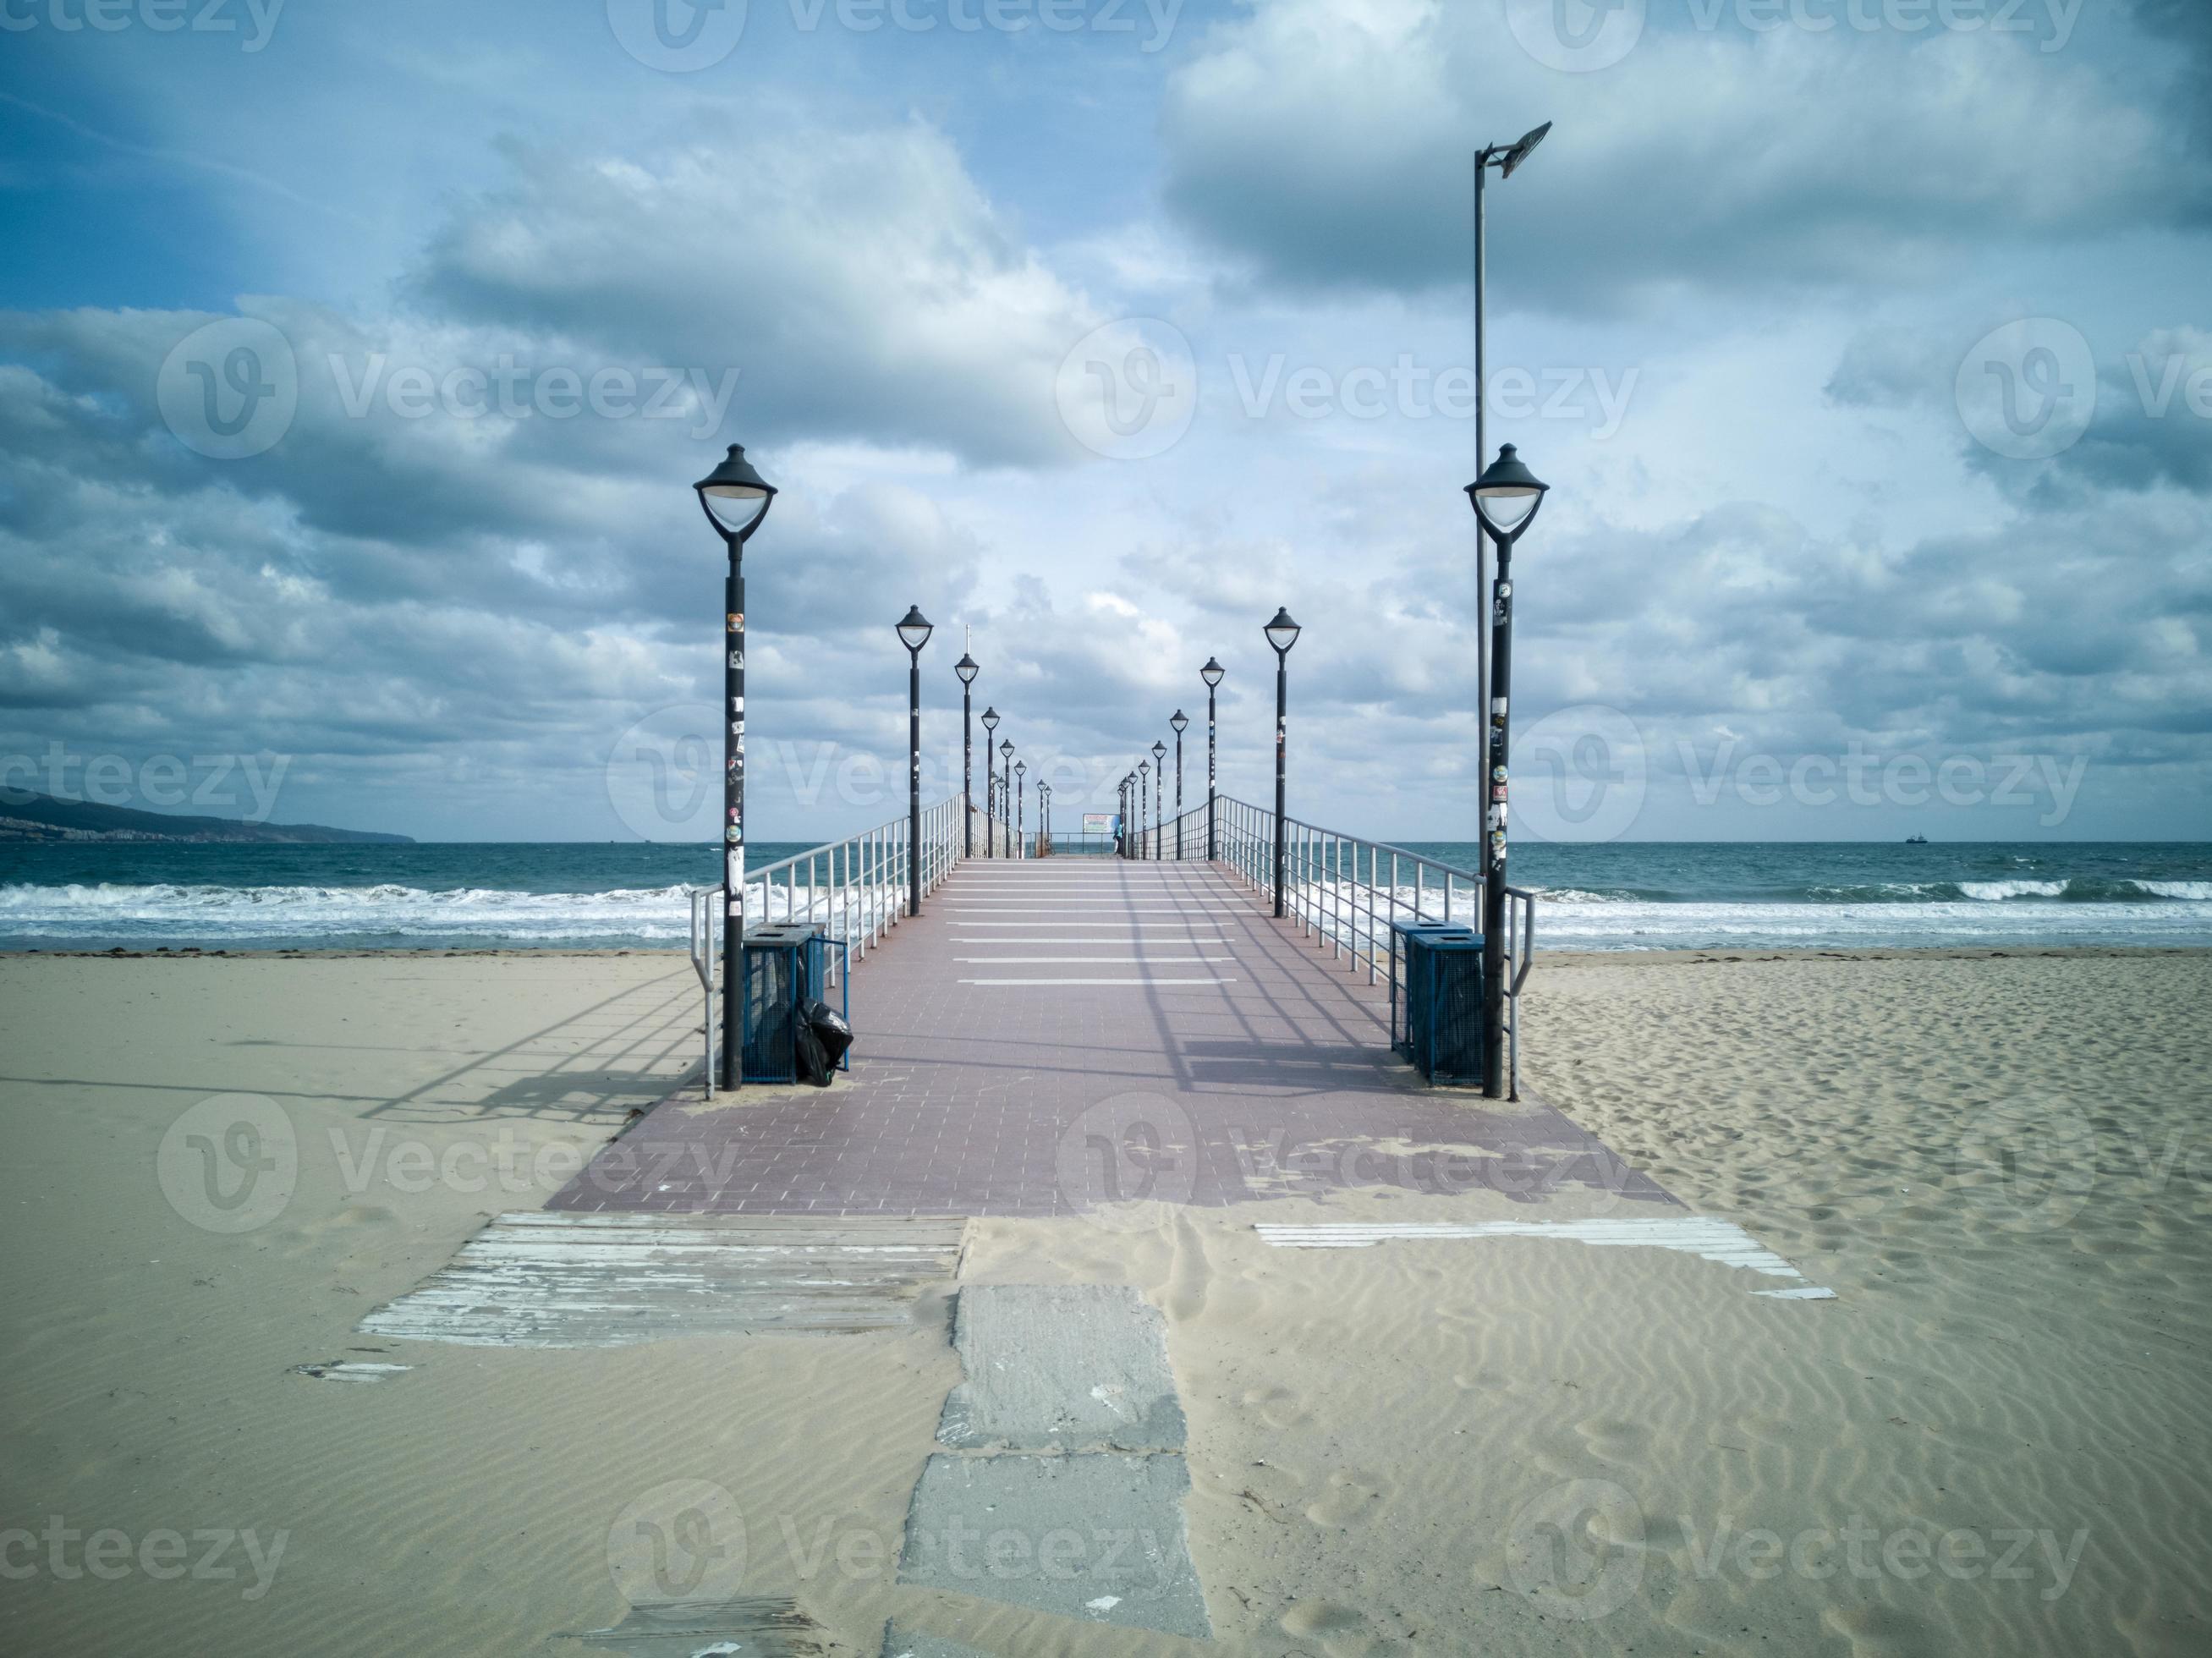 https://static.vecteezy.com/system/resources/previews/021/681/706/large_2x/a-wooden-pier-for-pleasure-and-fishing-boats-against-the-backdrop-of-a-stormy-blue-sea-and-clouds-photo.jpg